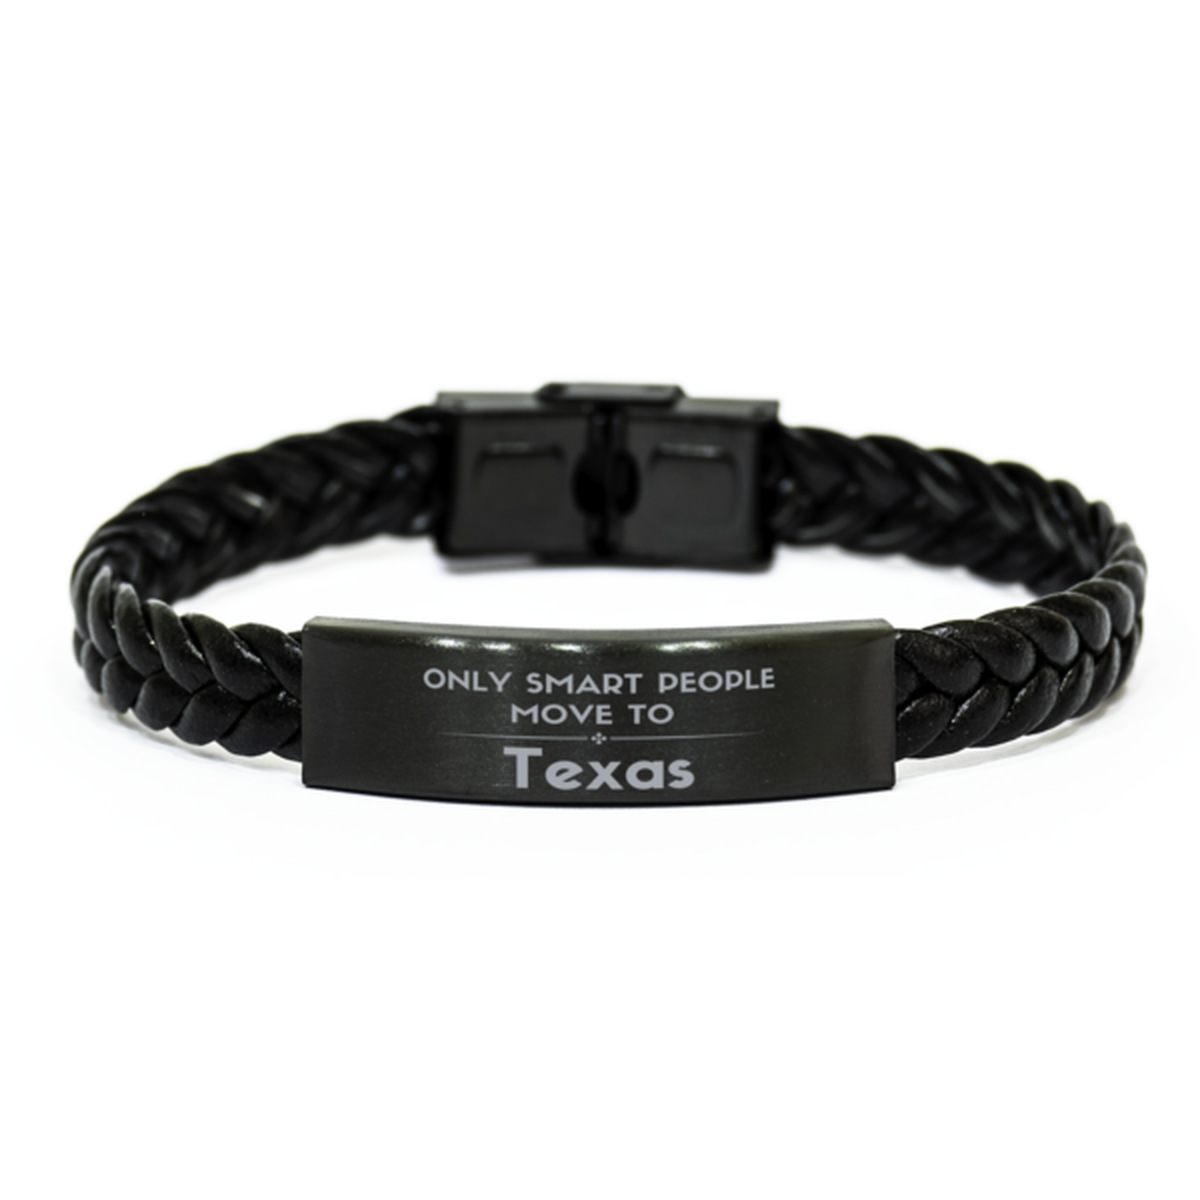 Only smart people move to Texas Braided Leather Bracelet, Gag Gifts For Texas, Move to Texas Gifts for Friends Coworker Funny Saying Quote